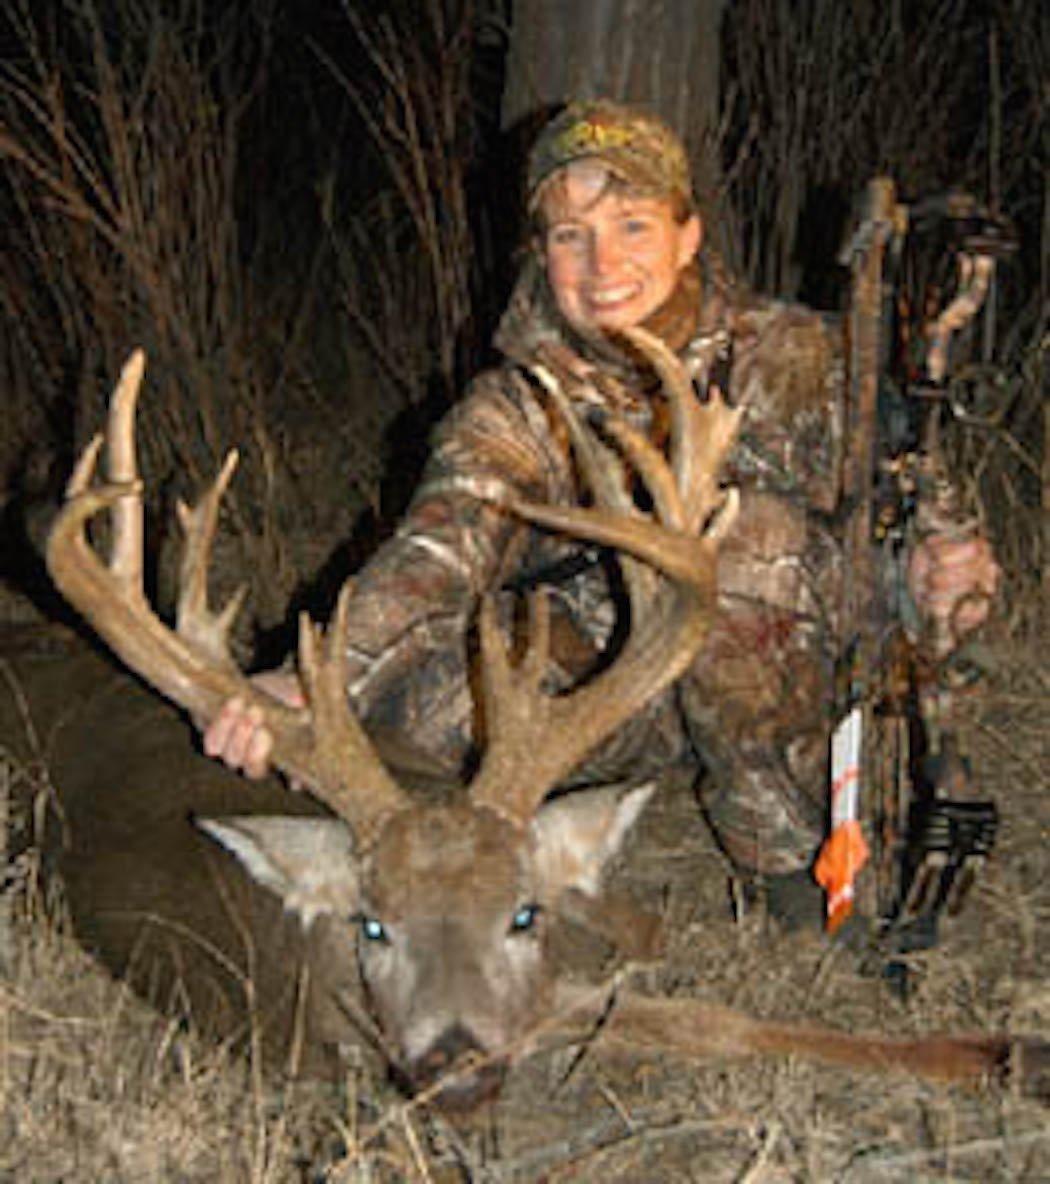 A look at this great buck. (Archer's Choice photo)